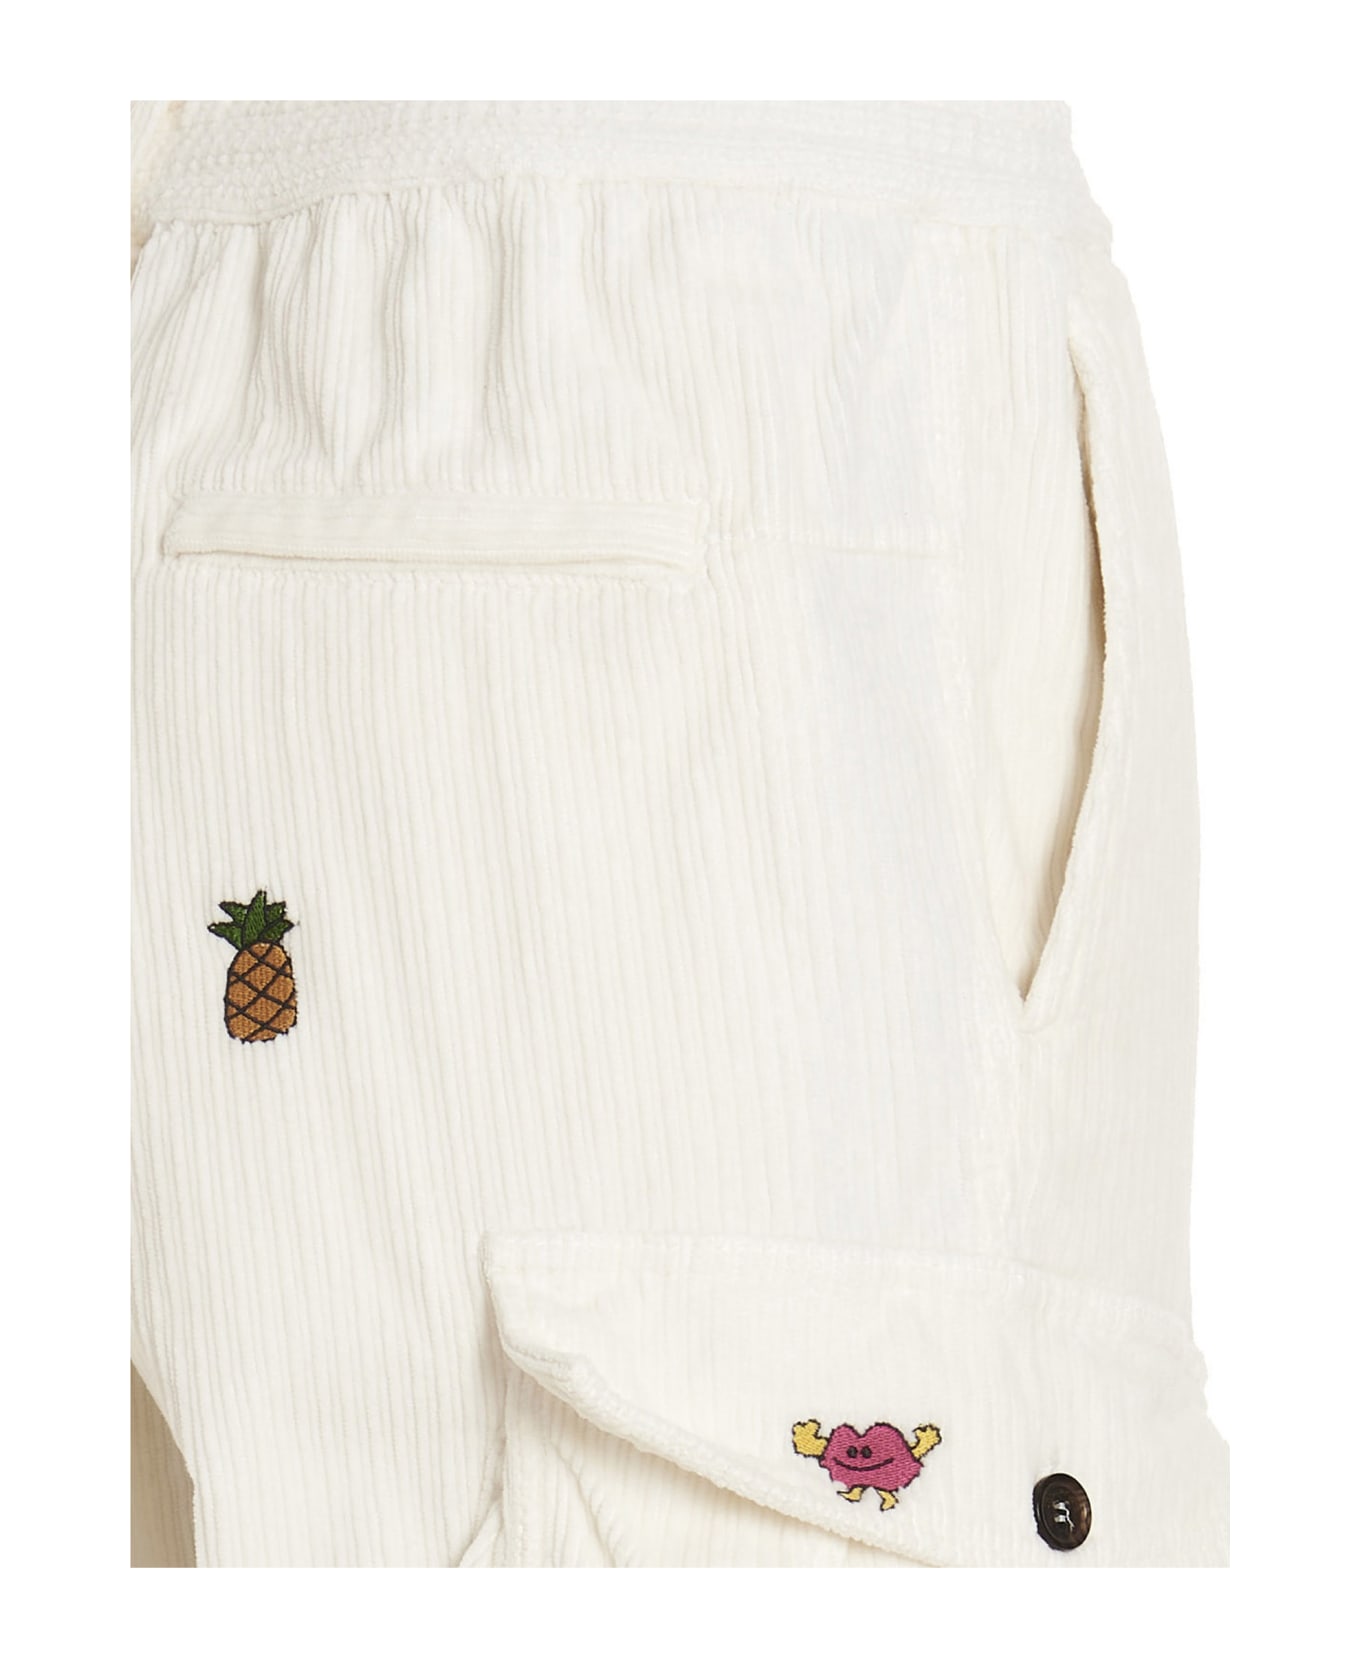 Dsquared2 'cyprus' Trousers - White